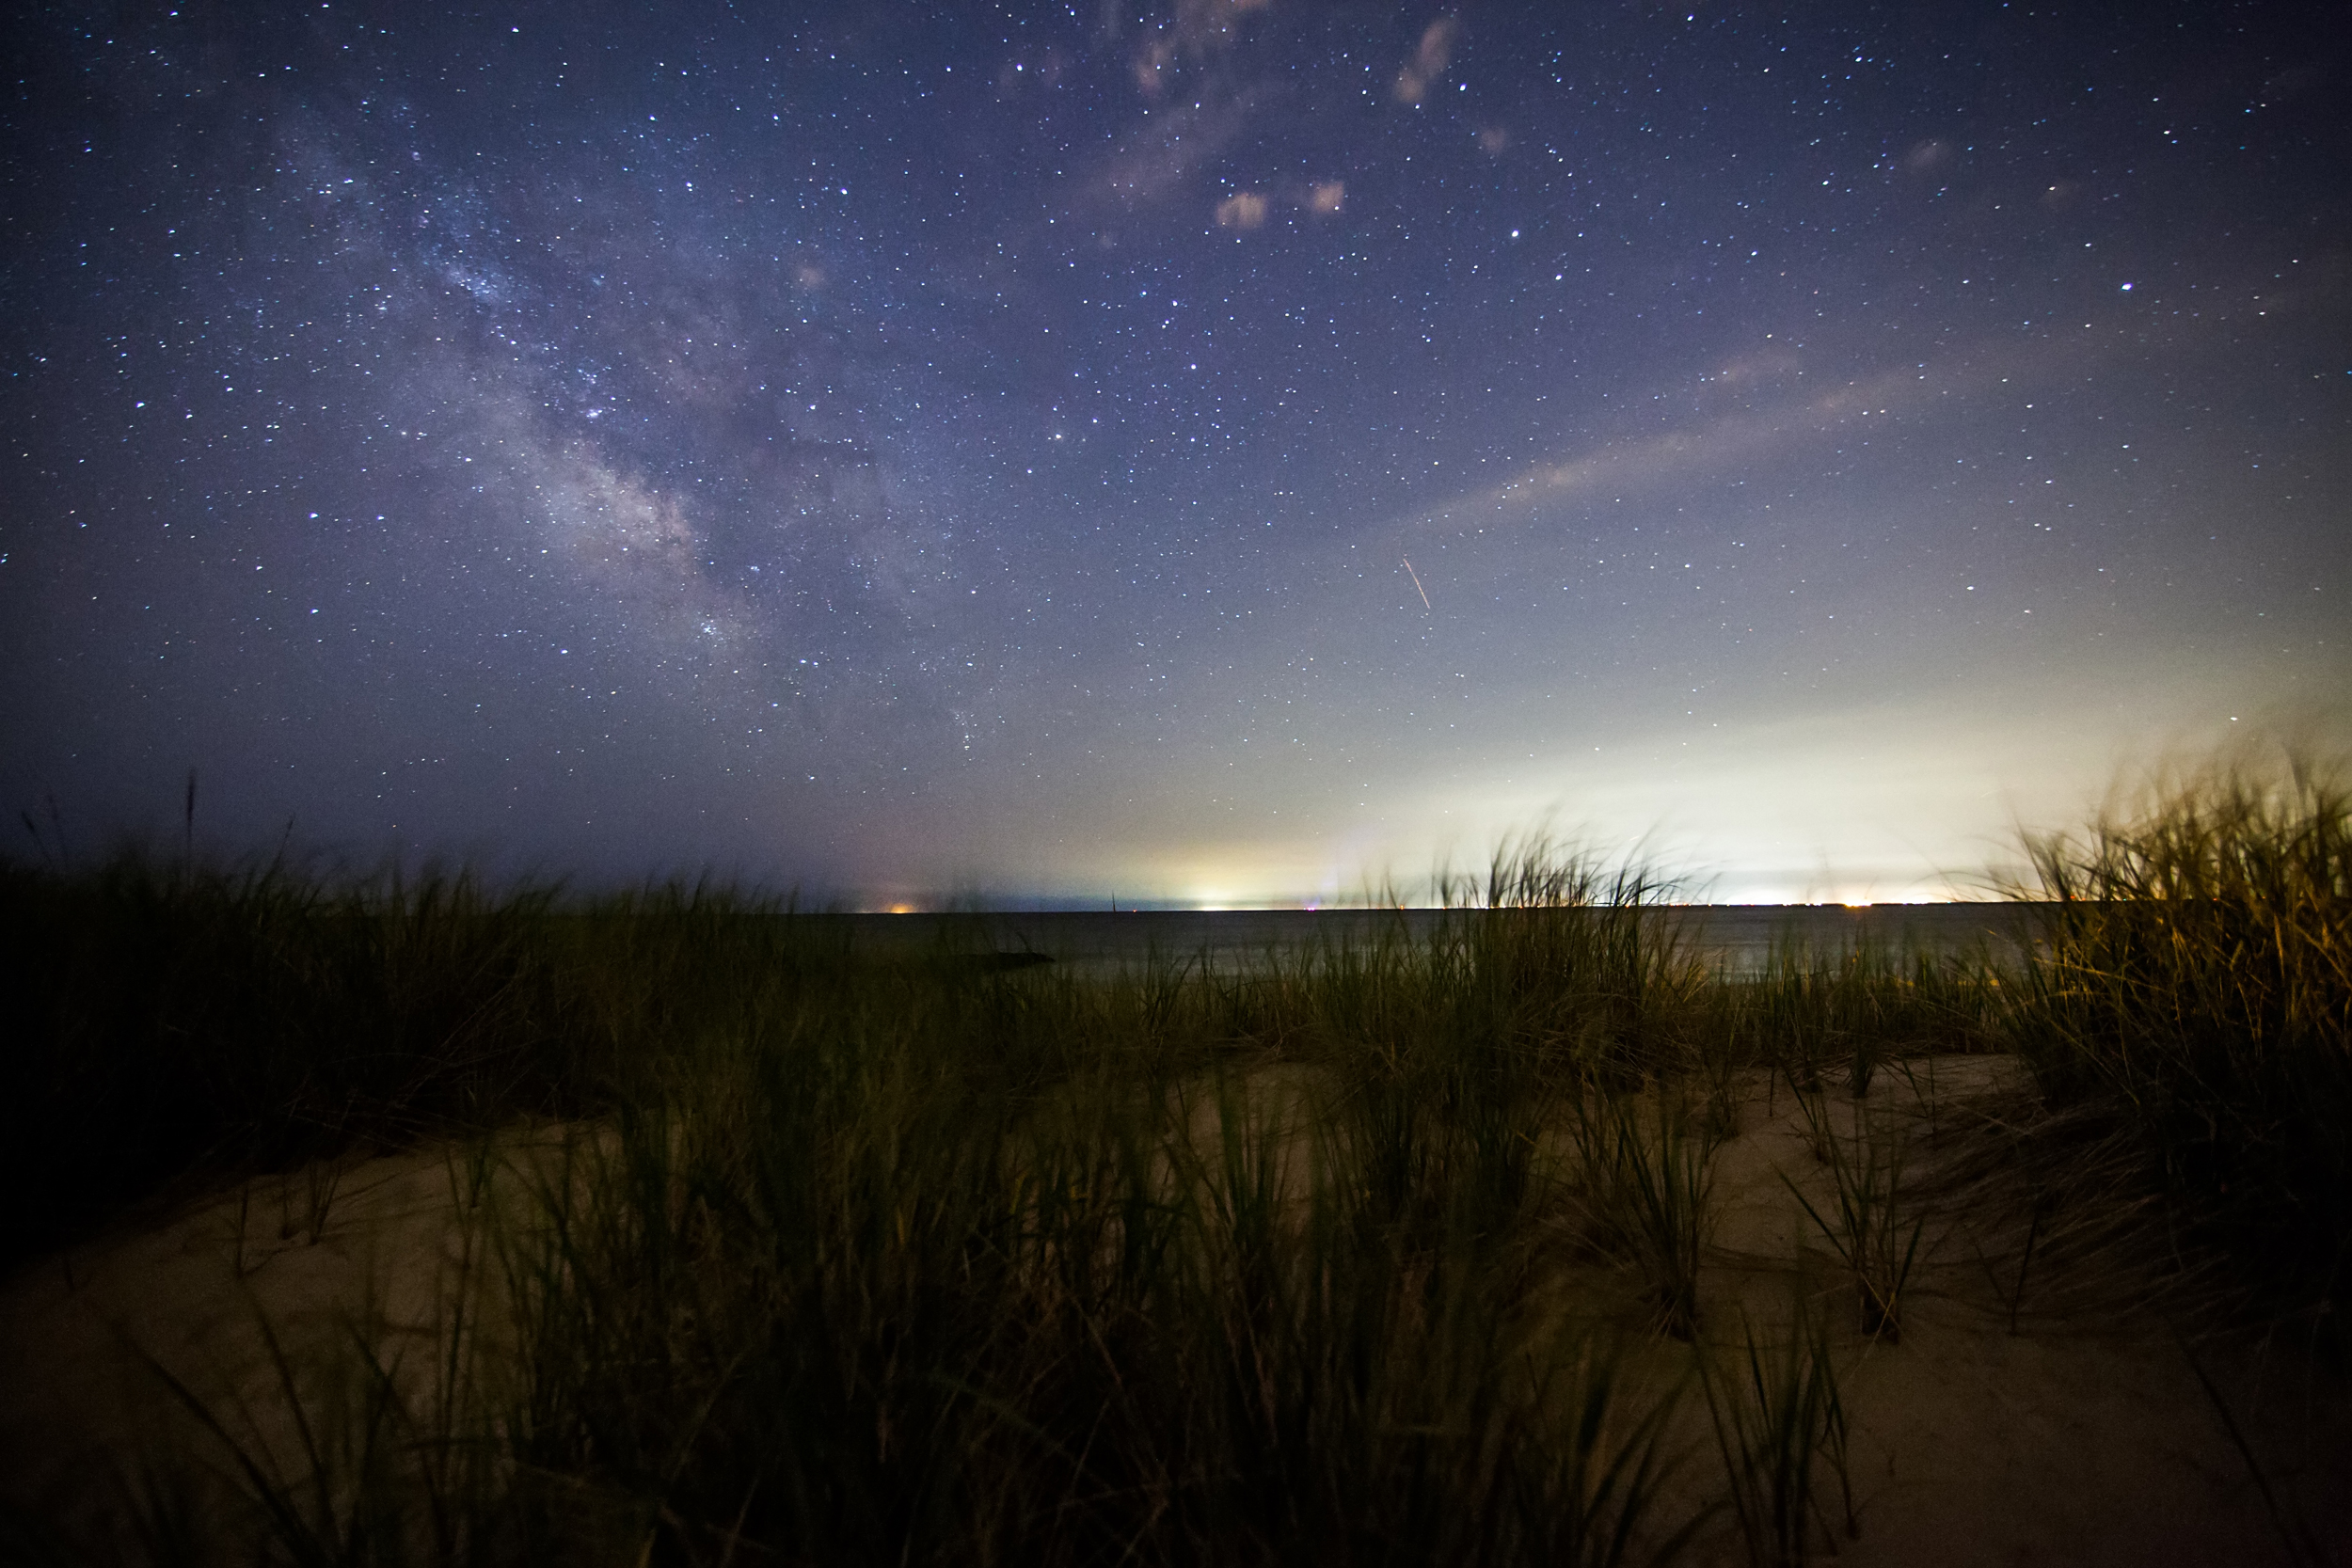 Milkyway Rising in Cape May, NJ